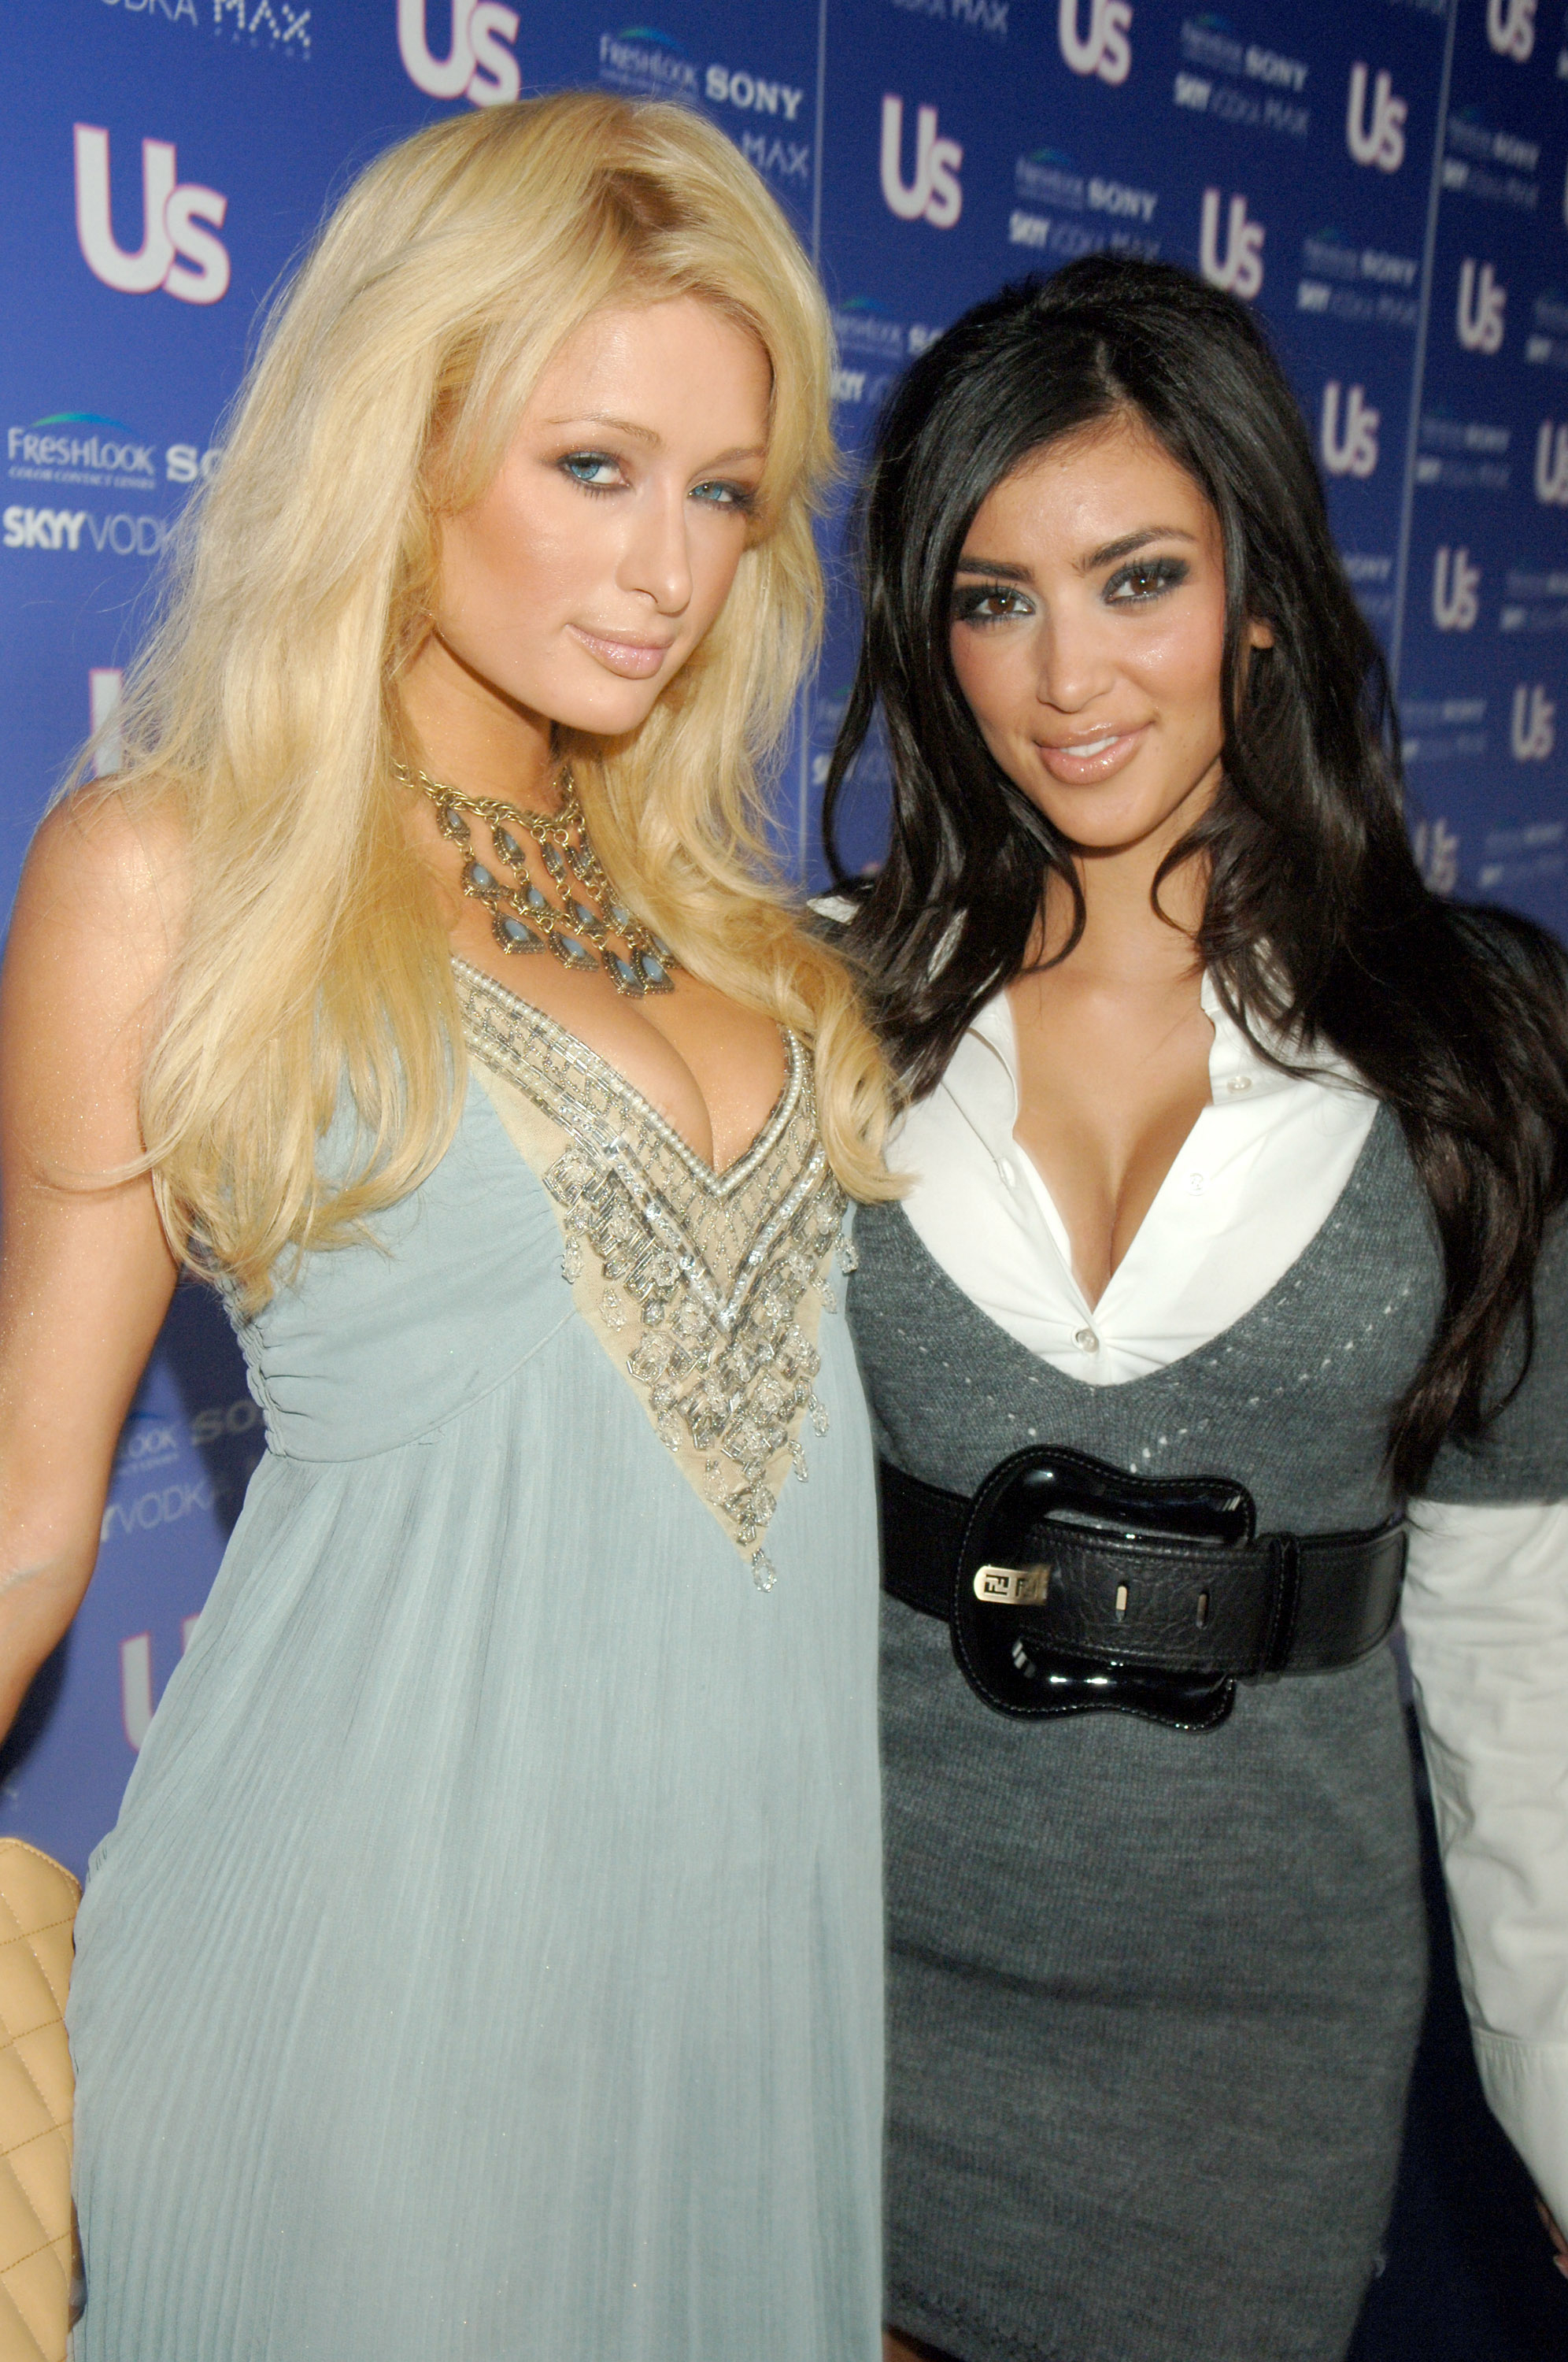 Close-up of Kim and Paris smiling and standing together at a media event